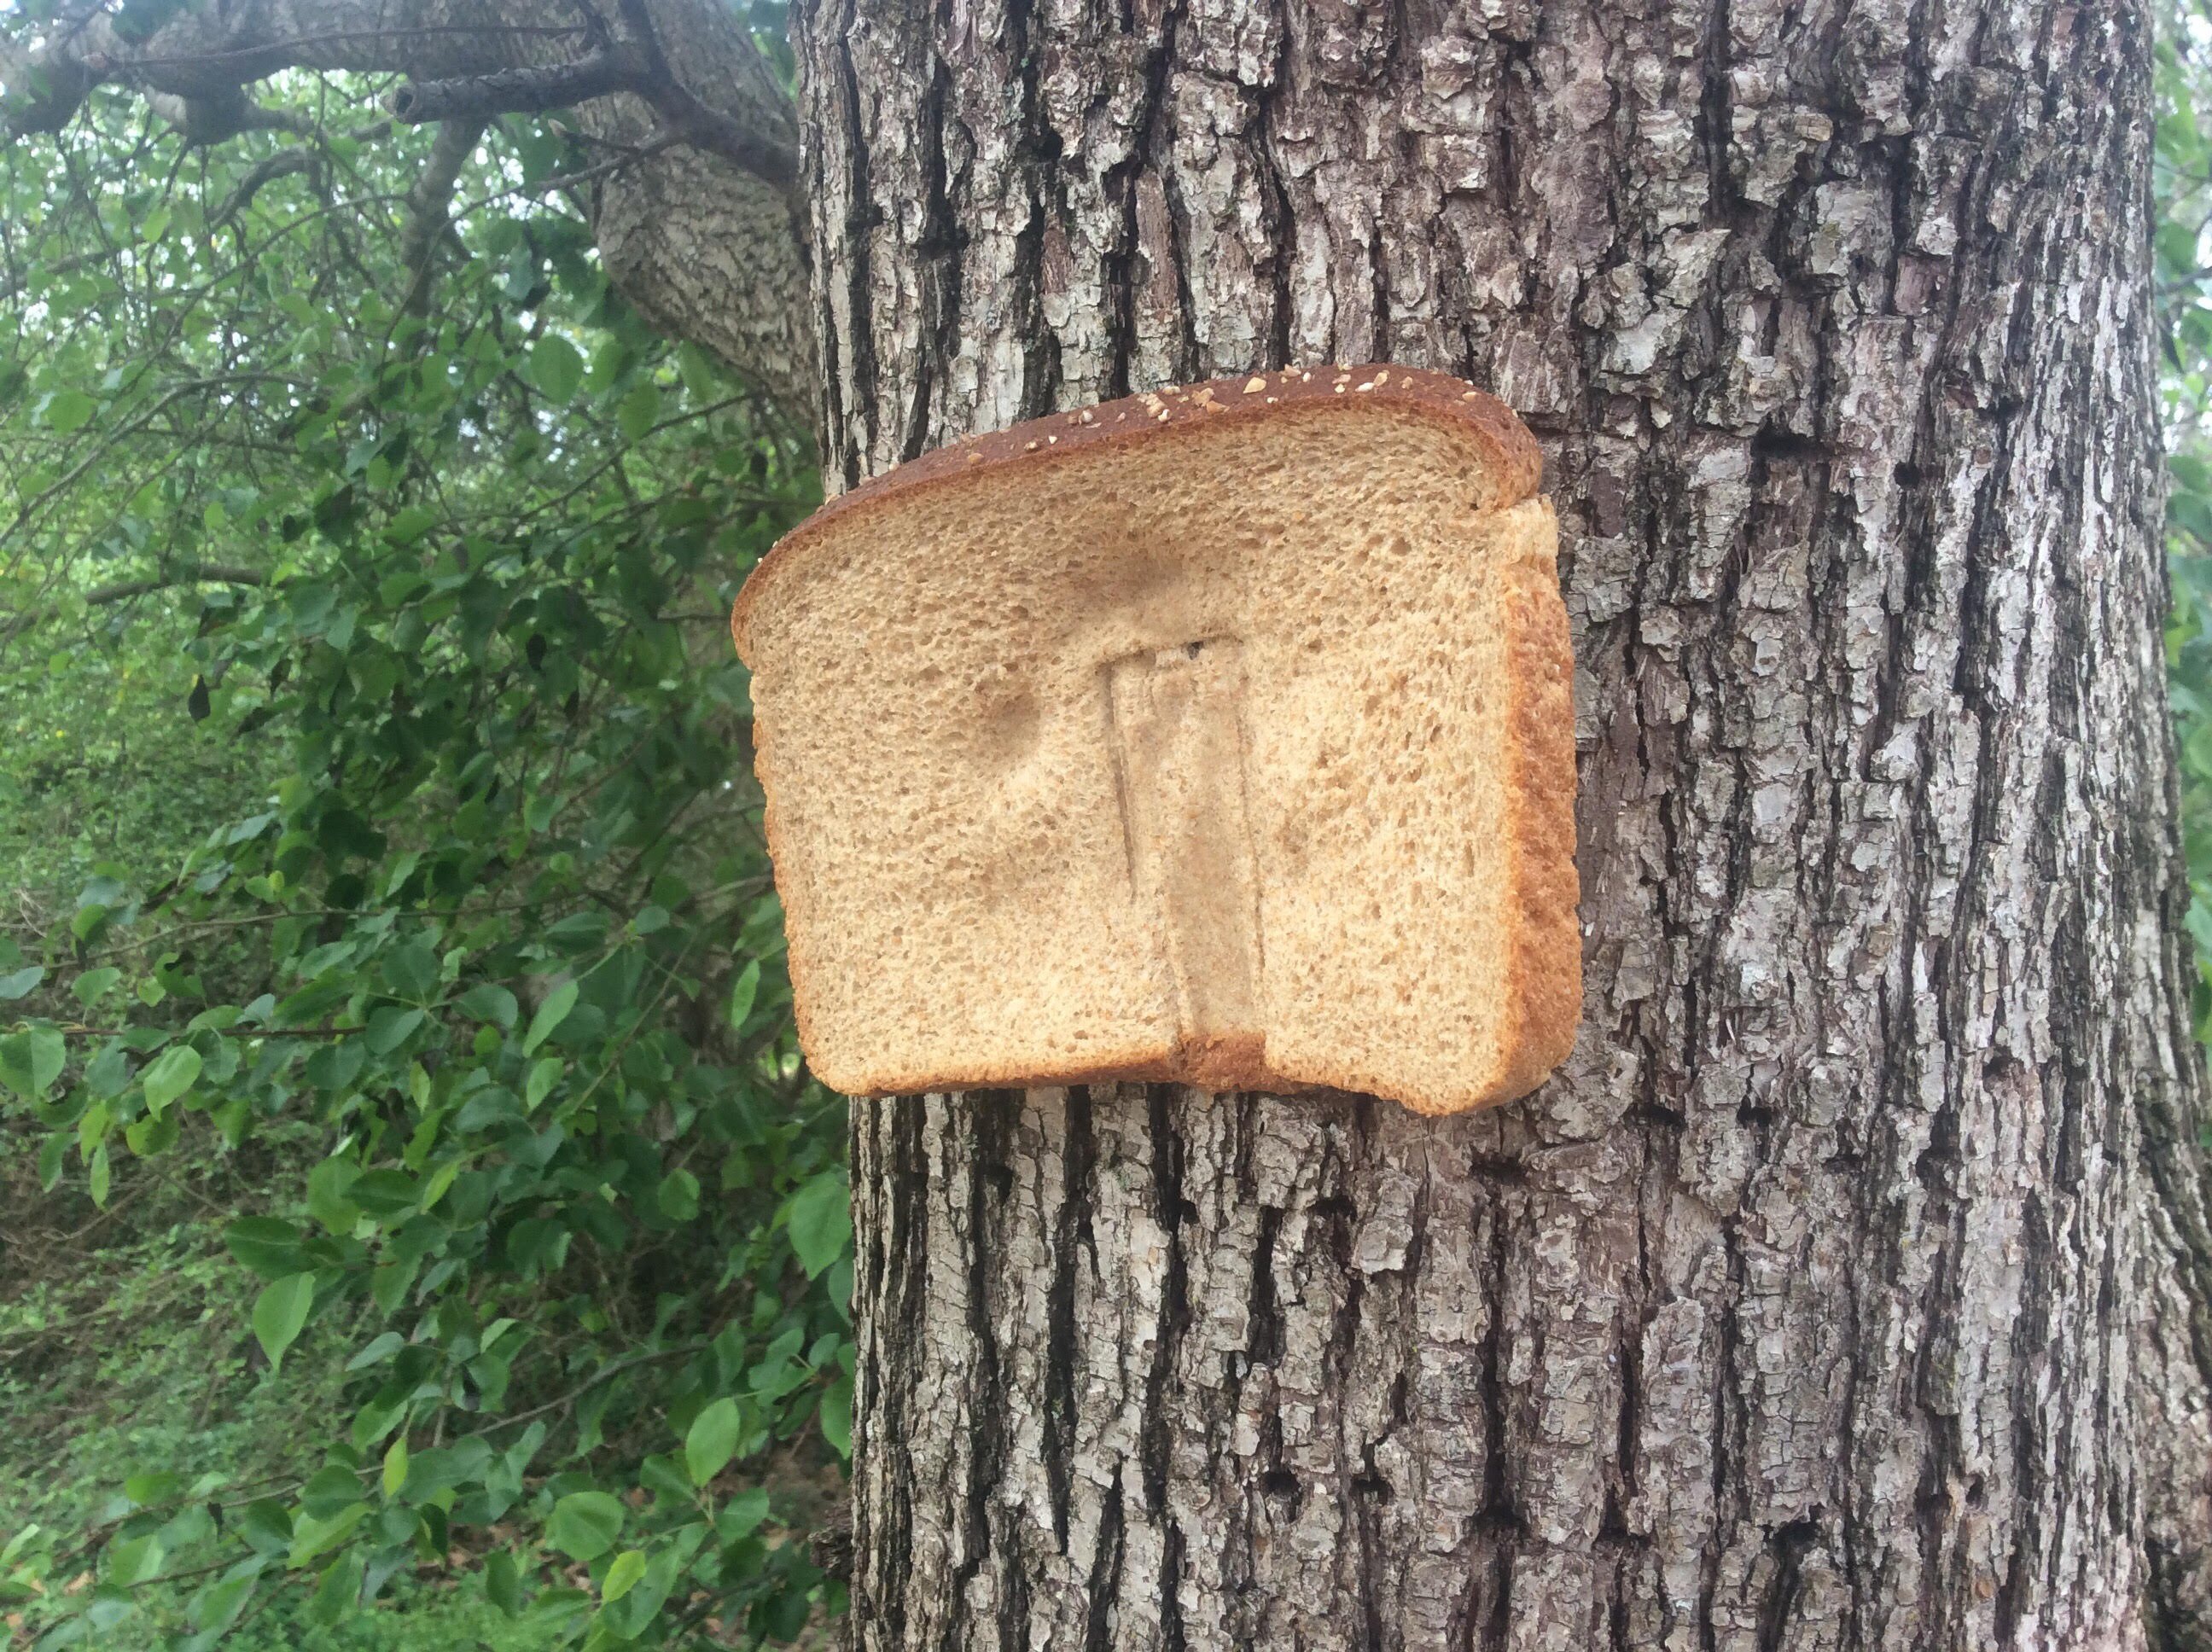 Bread stapled to a tree